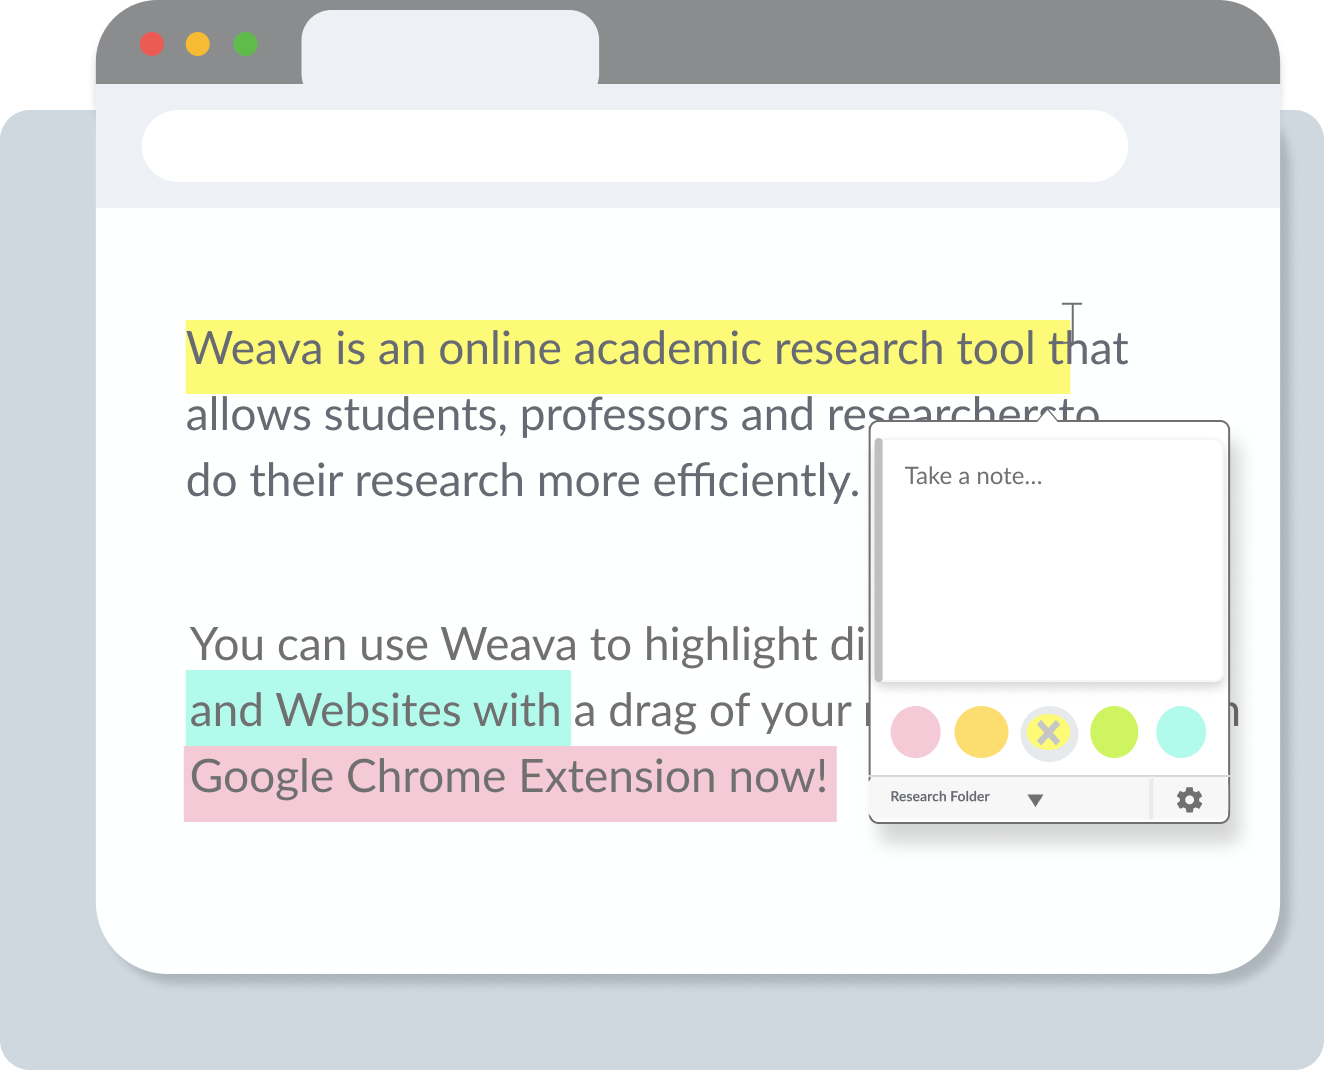 Weava Highlighter - Free Research Tool for PDFs & Webpages